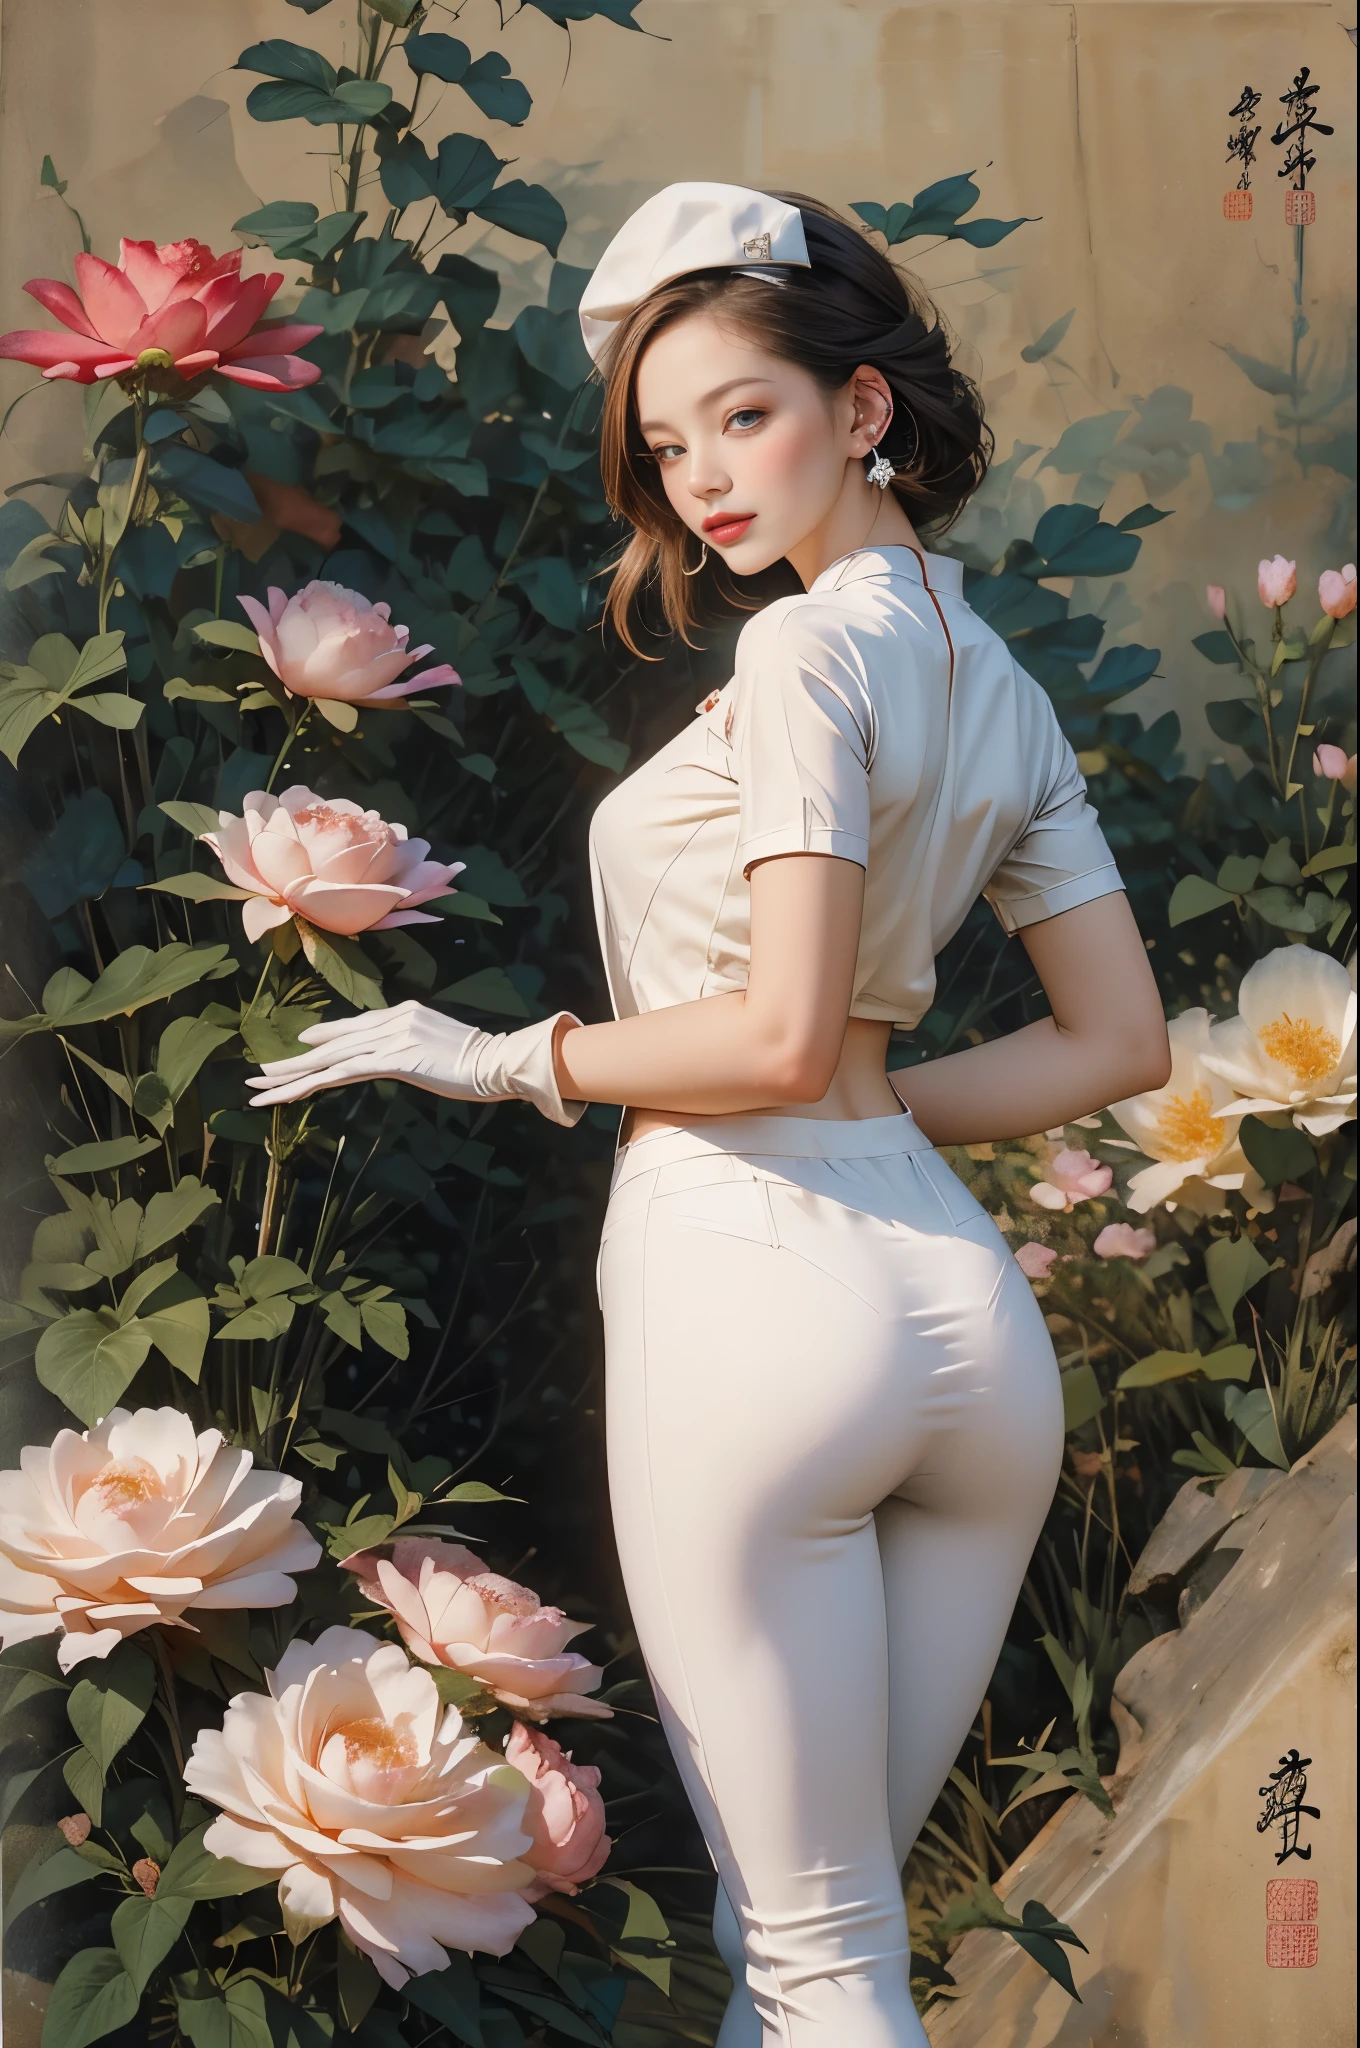 （tmasterpiece，quality，Best quality，offcial art，Beauty and aesthetics：1.2）， 1 Lady, nurses, tightsuit, nurses Cap, White sanitary ware, ((white leggings underneath, absolute chance)), Tight gloves,Don't wear it， whitegloves, red hair clothing, eBlue eyes, Pink lipstick, ssmile, Eternal, Watch from behind, looking back over shoulder at viewer, Clear silhouette, short- sleeved, A mature woman, 35yo, best quality, tmasterpiece, infirmary, As shown in the image, middlebreast, Transcendent, Rain hits the face,  lewd poses, The are visible，Very meticulous，（s fractal art：1.1），（One color：1.1）（Blooming flowers：1.3），Most detailed，（ tangled:1.2), (Dynamic lewd poses), (abstract backgrounds:1.3), (Traditional Chinese fabrics:1.2), (Skin glows), (Lots of colors:1.4), ,(ear nipple ring:1.4)，（Decorative painting：1.6，）， lamplight,Ink painting and waterconk，water ink，